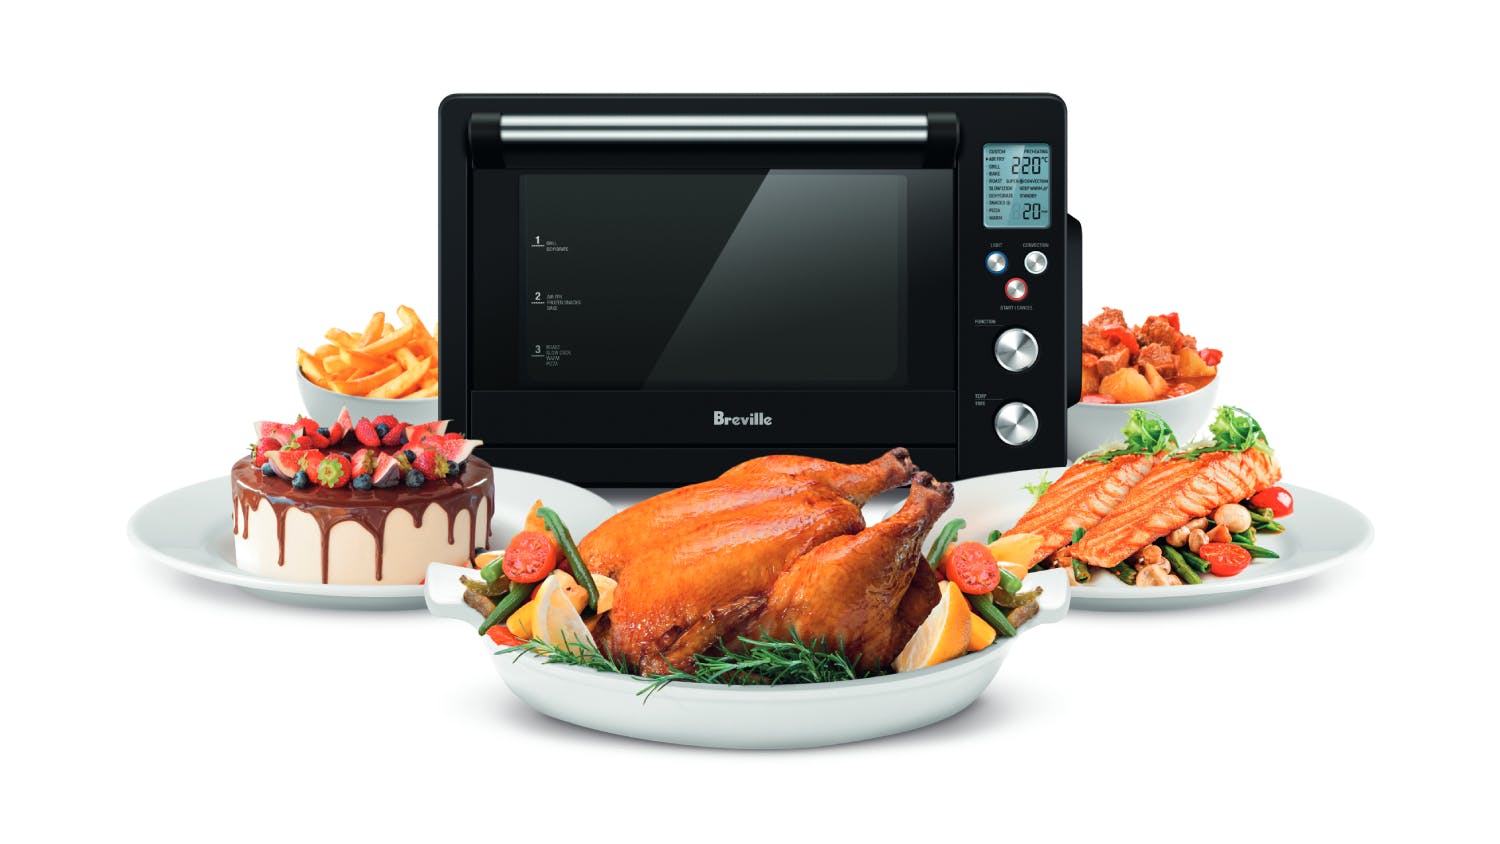 Breville 24L the All-in-One Compact Air Fryer Oven - Matte Black